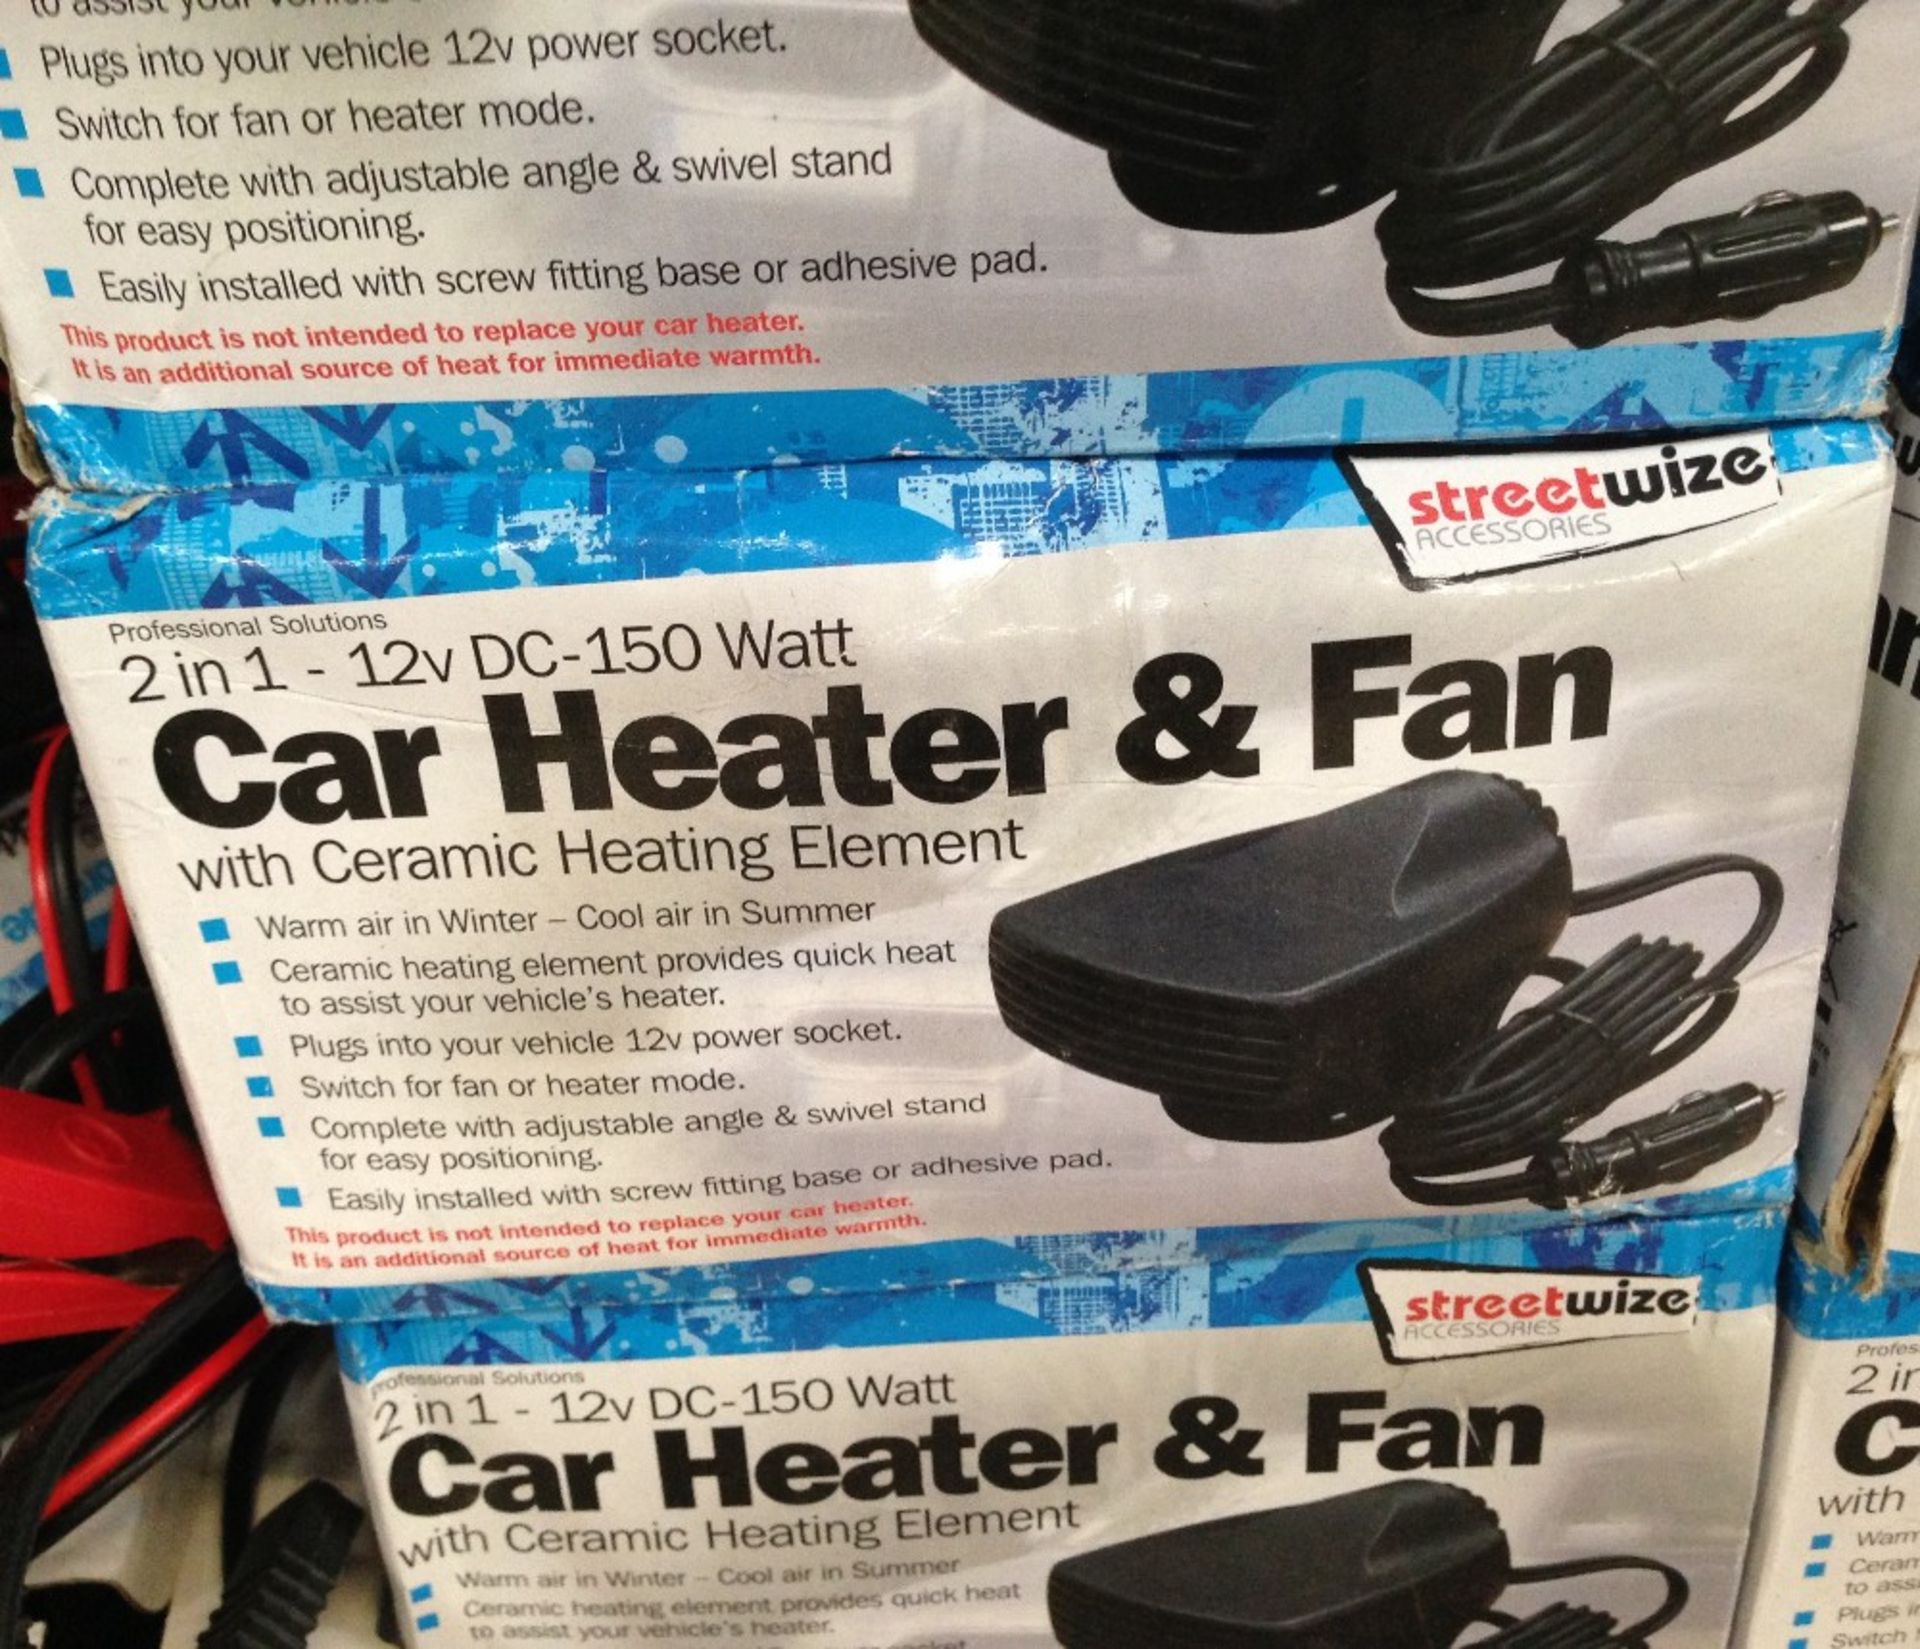 10pcs - Streetwise -  2 in 1 , 12V car heater / fan unit with ceramic heating element rrp £12.99 .